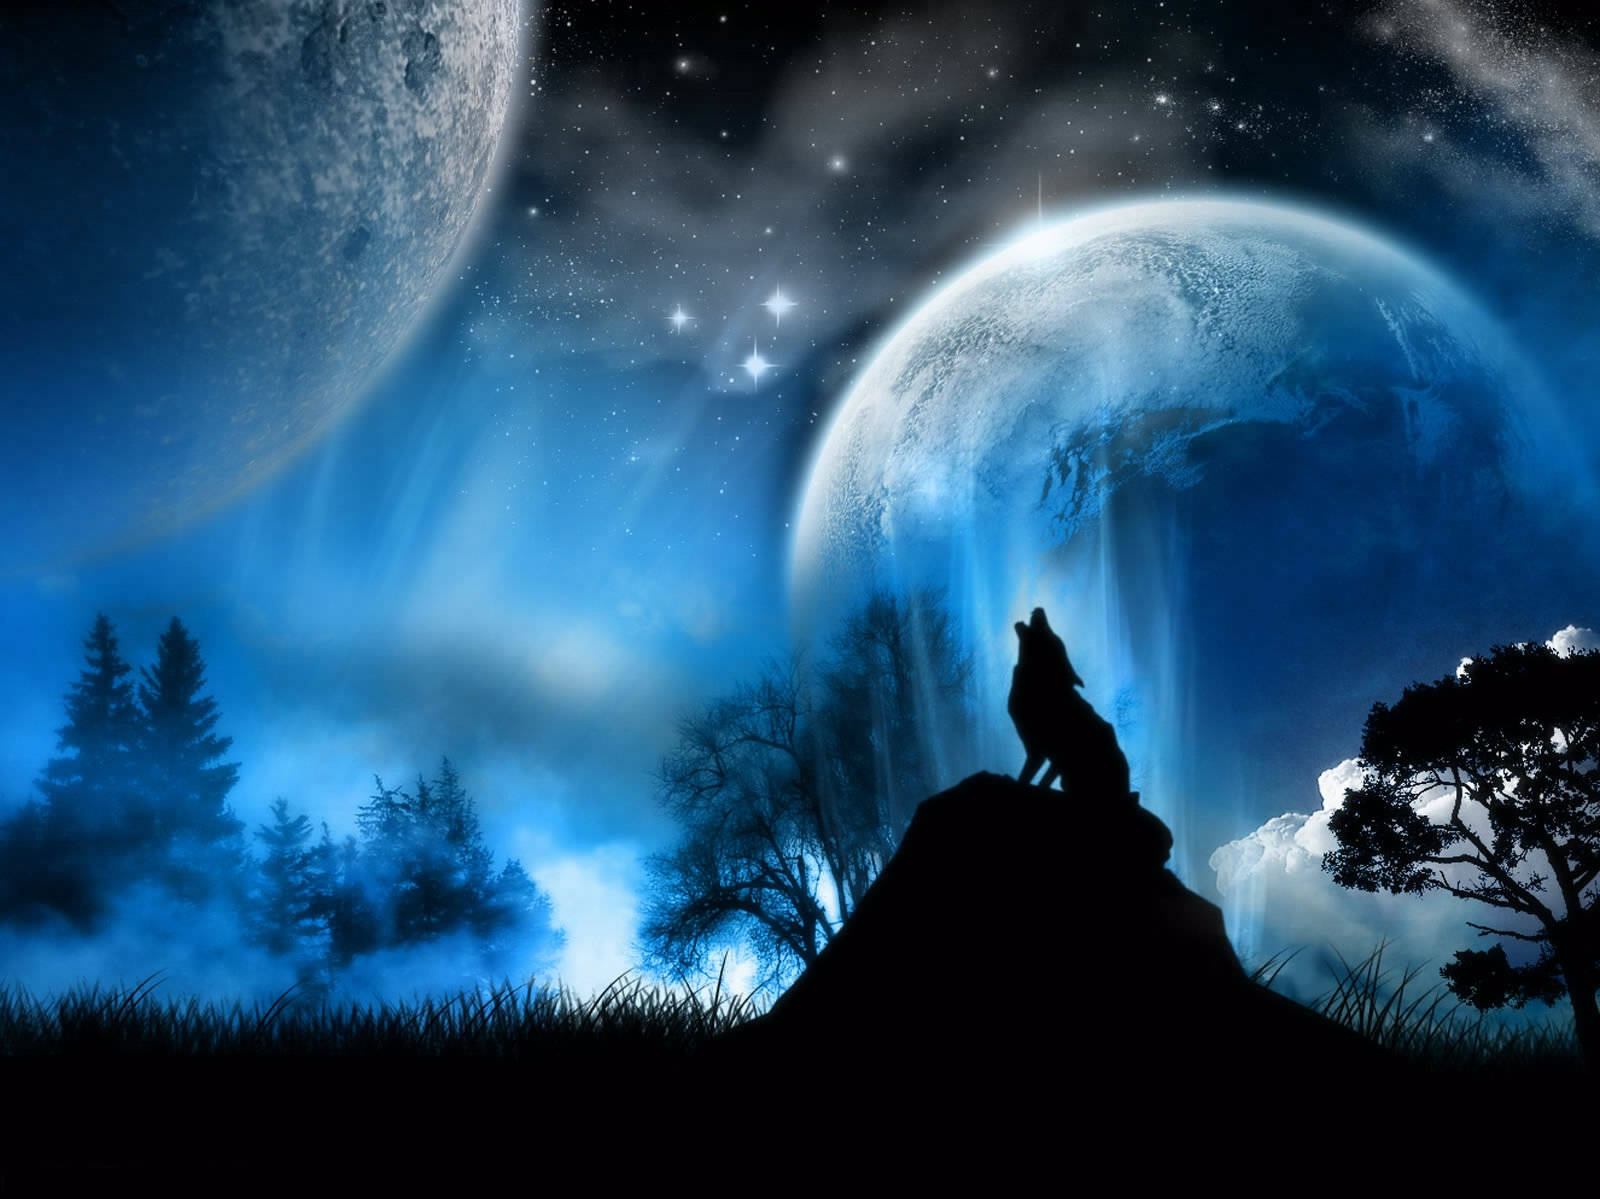 Wolf Laptop Wallpapers